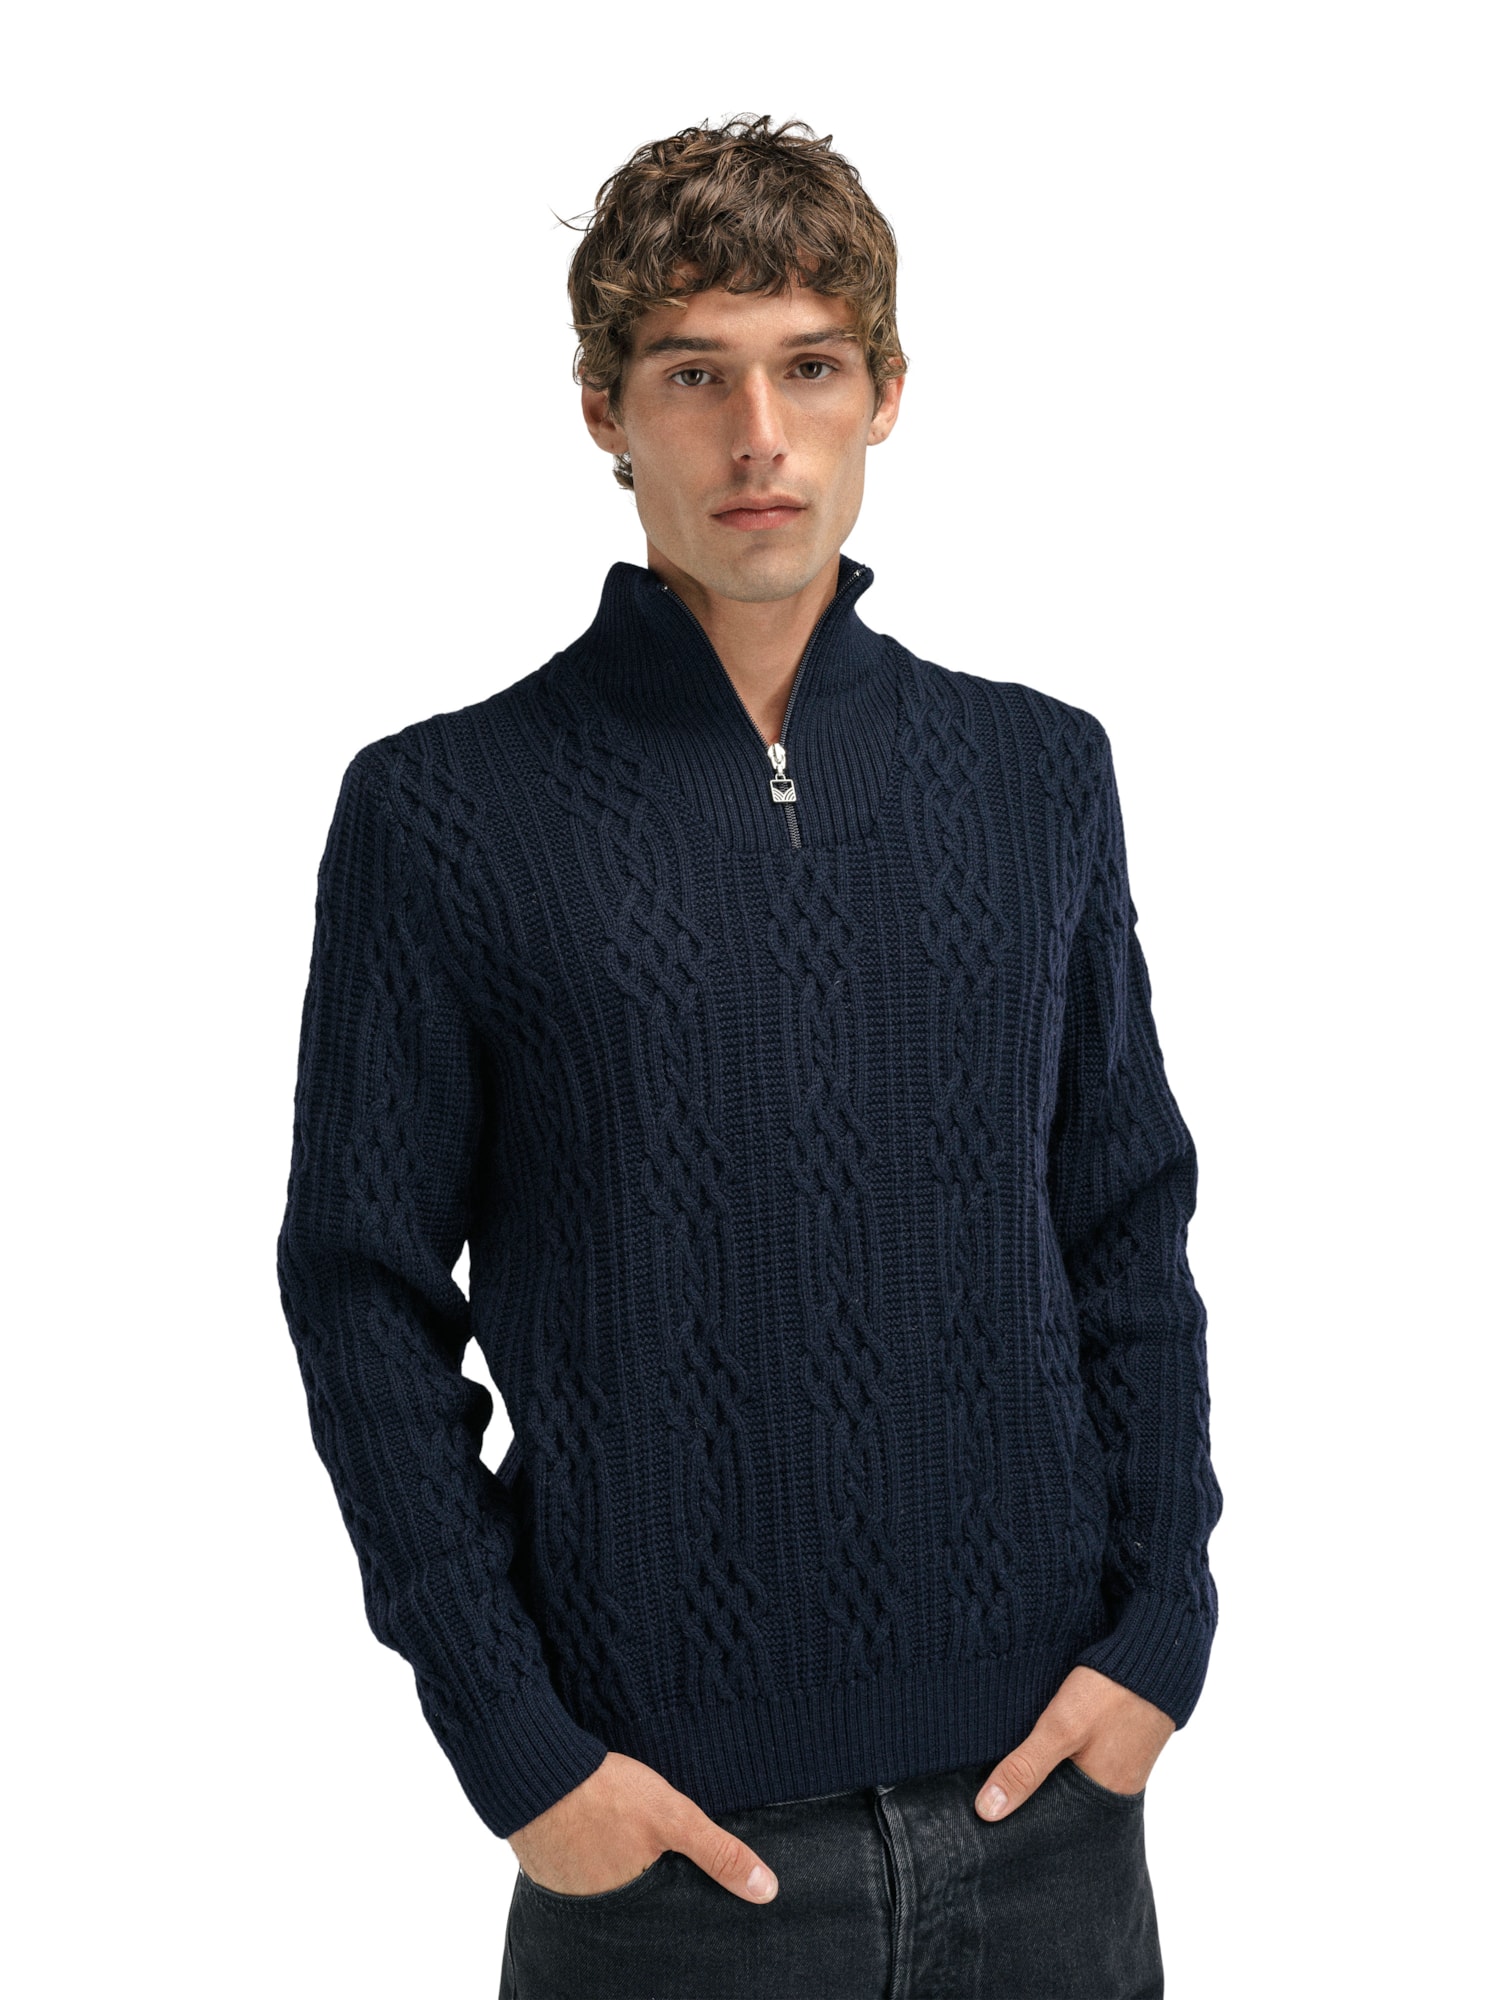 Hoven Knit Sweater - Men - Navy - Dale of Norway - Dale of Norway